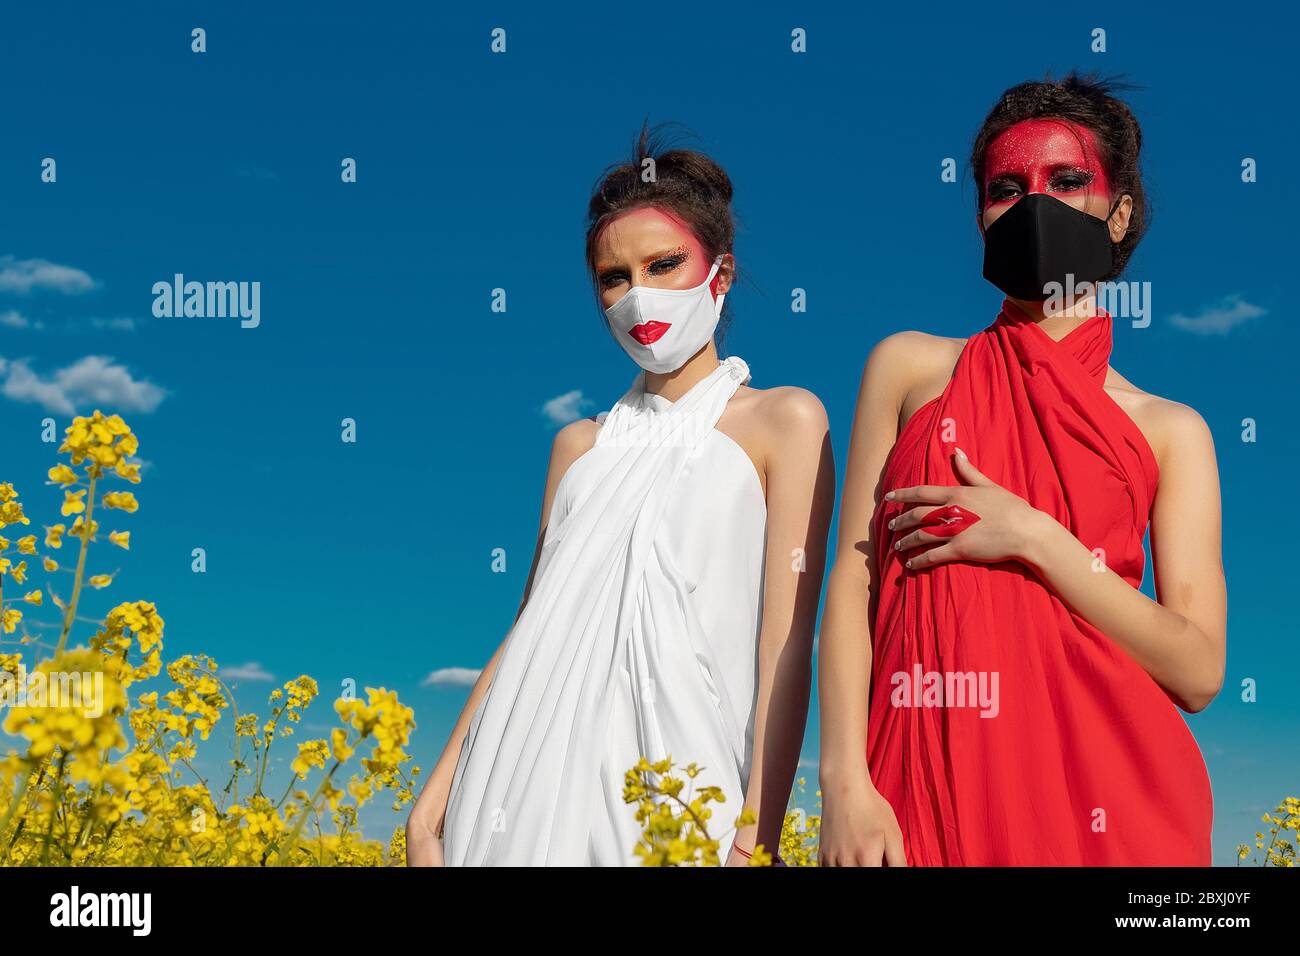 Two beautiful young brunette girls with creative bright makeup in tunics on a background of a field of yellow flowers and blue sky. One girl in a mask Stock Photo